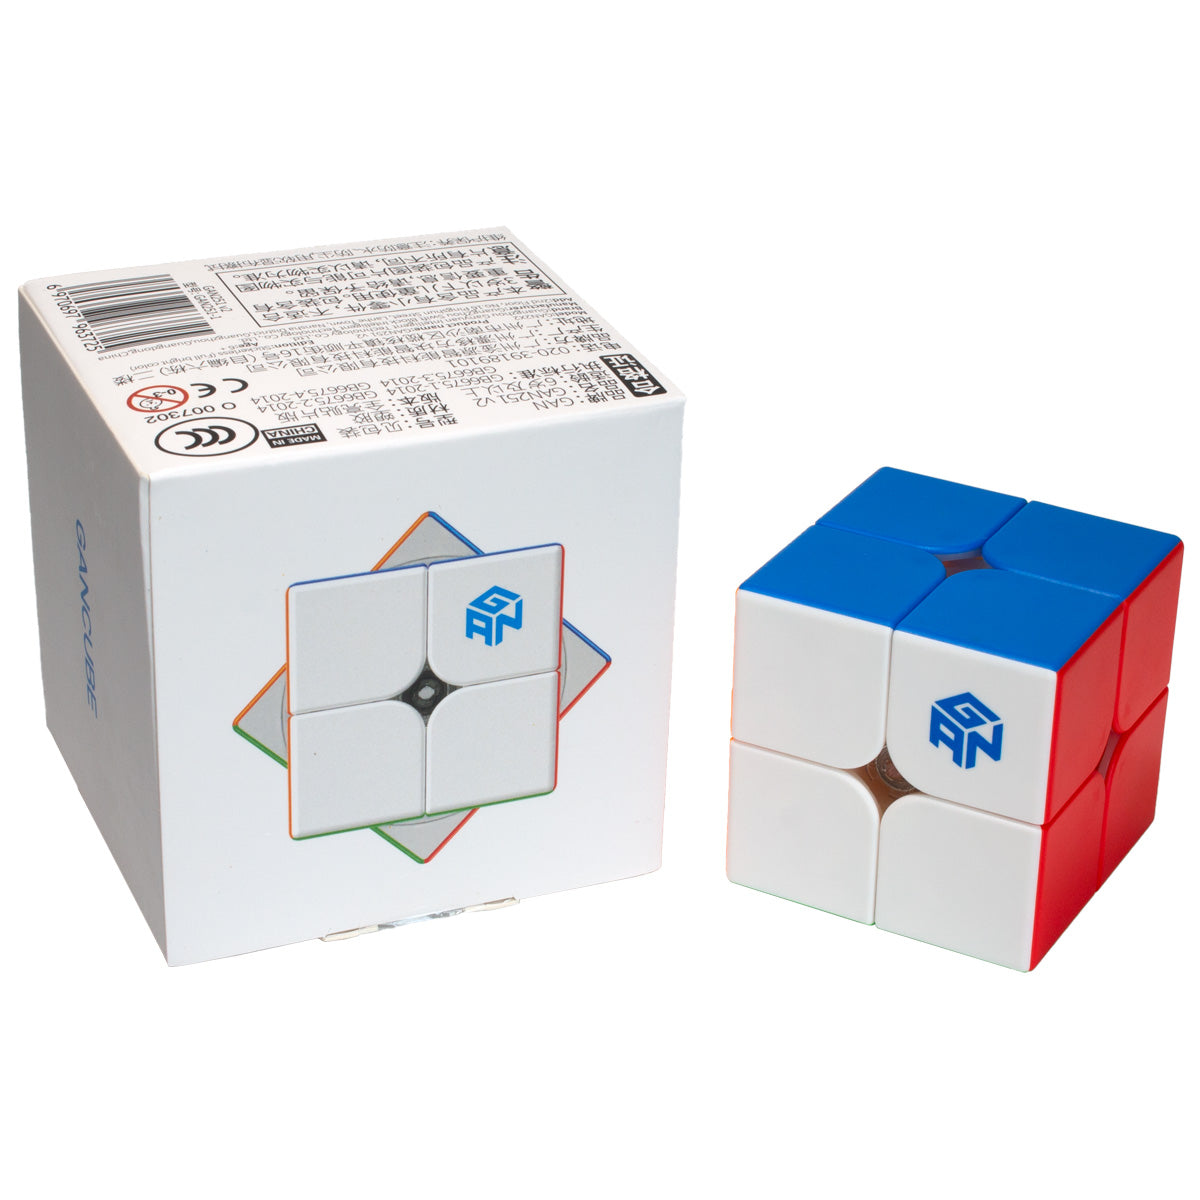 2X2 Speed Cube - GAN 251 V2 with its box on a white background 